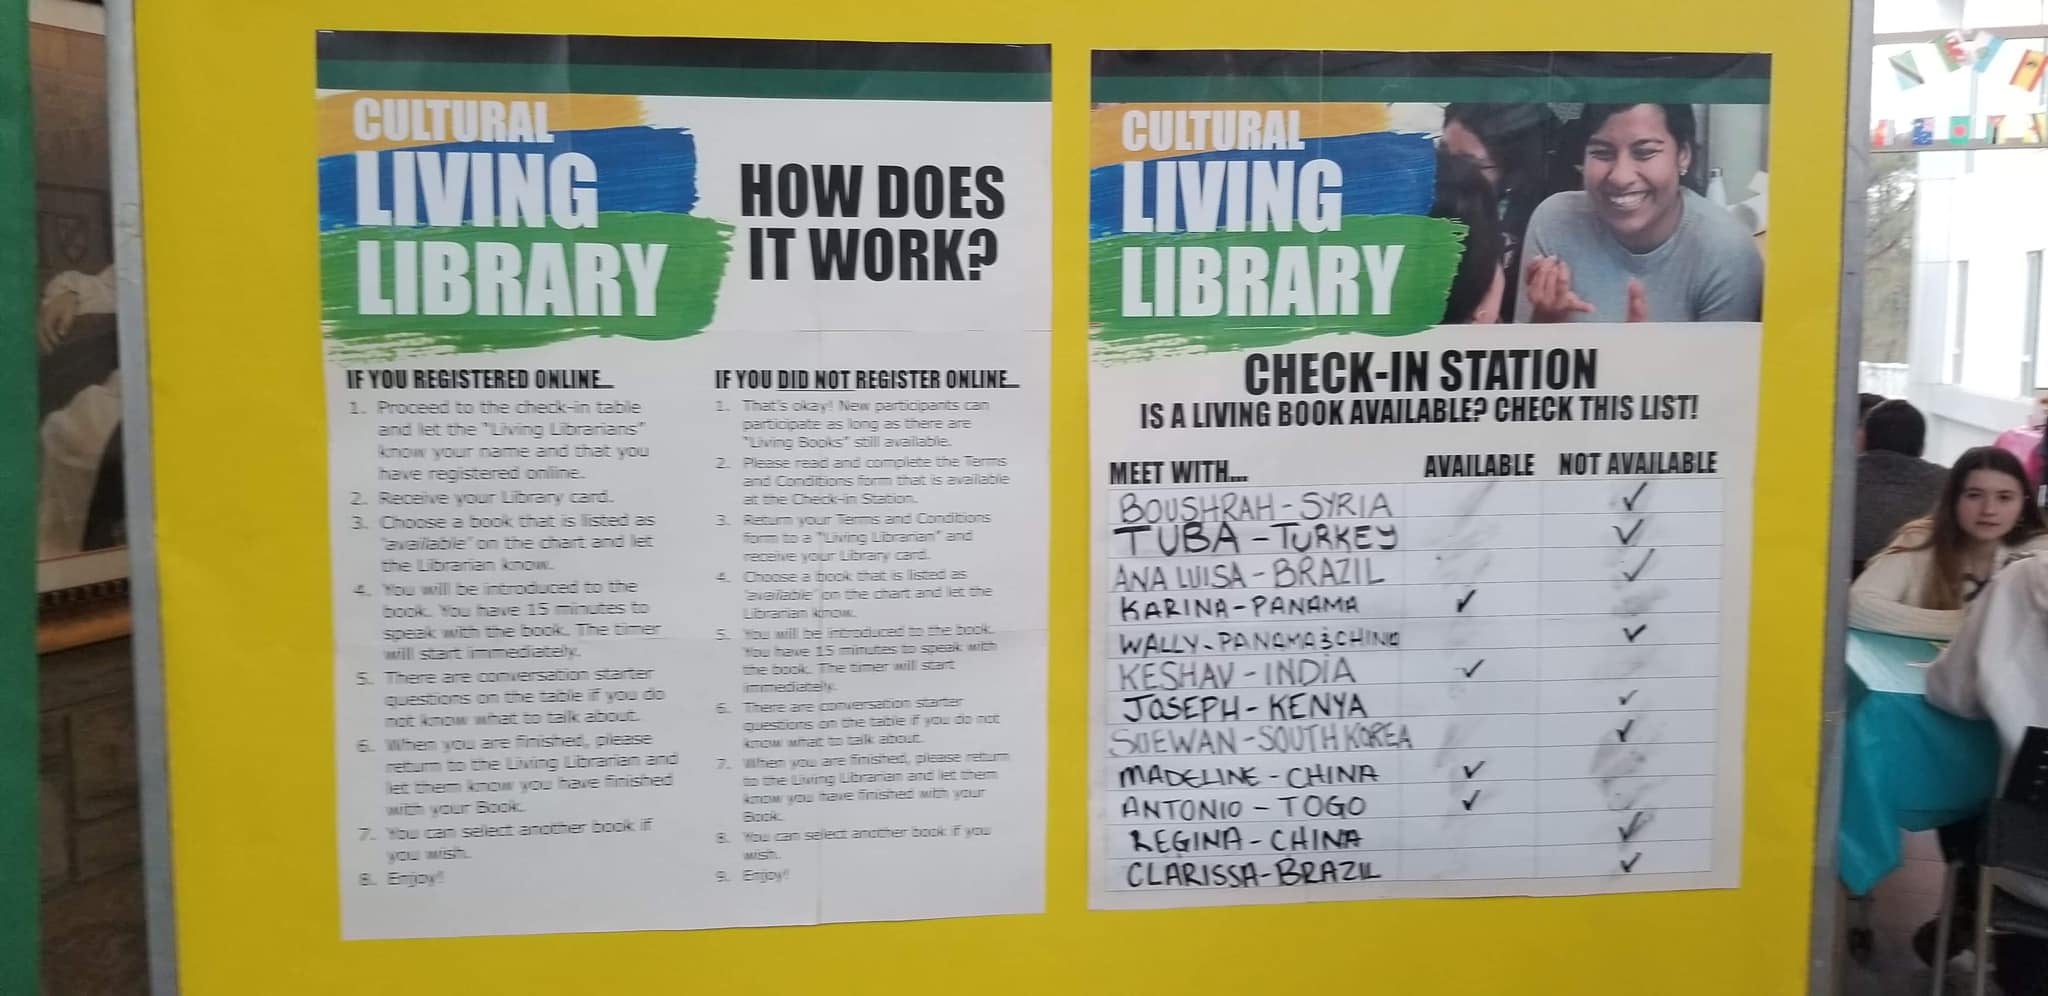 Here is how the Living Library works and what Living Books are available. 